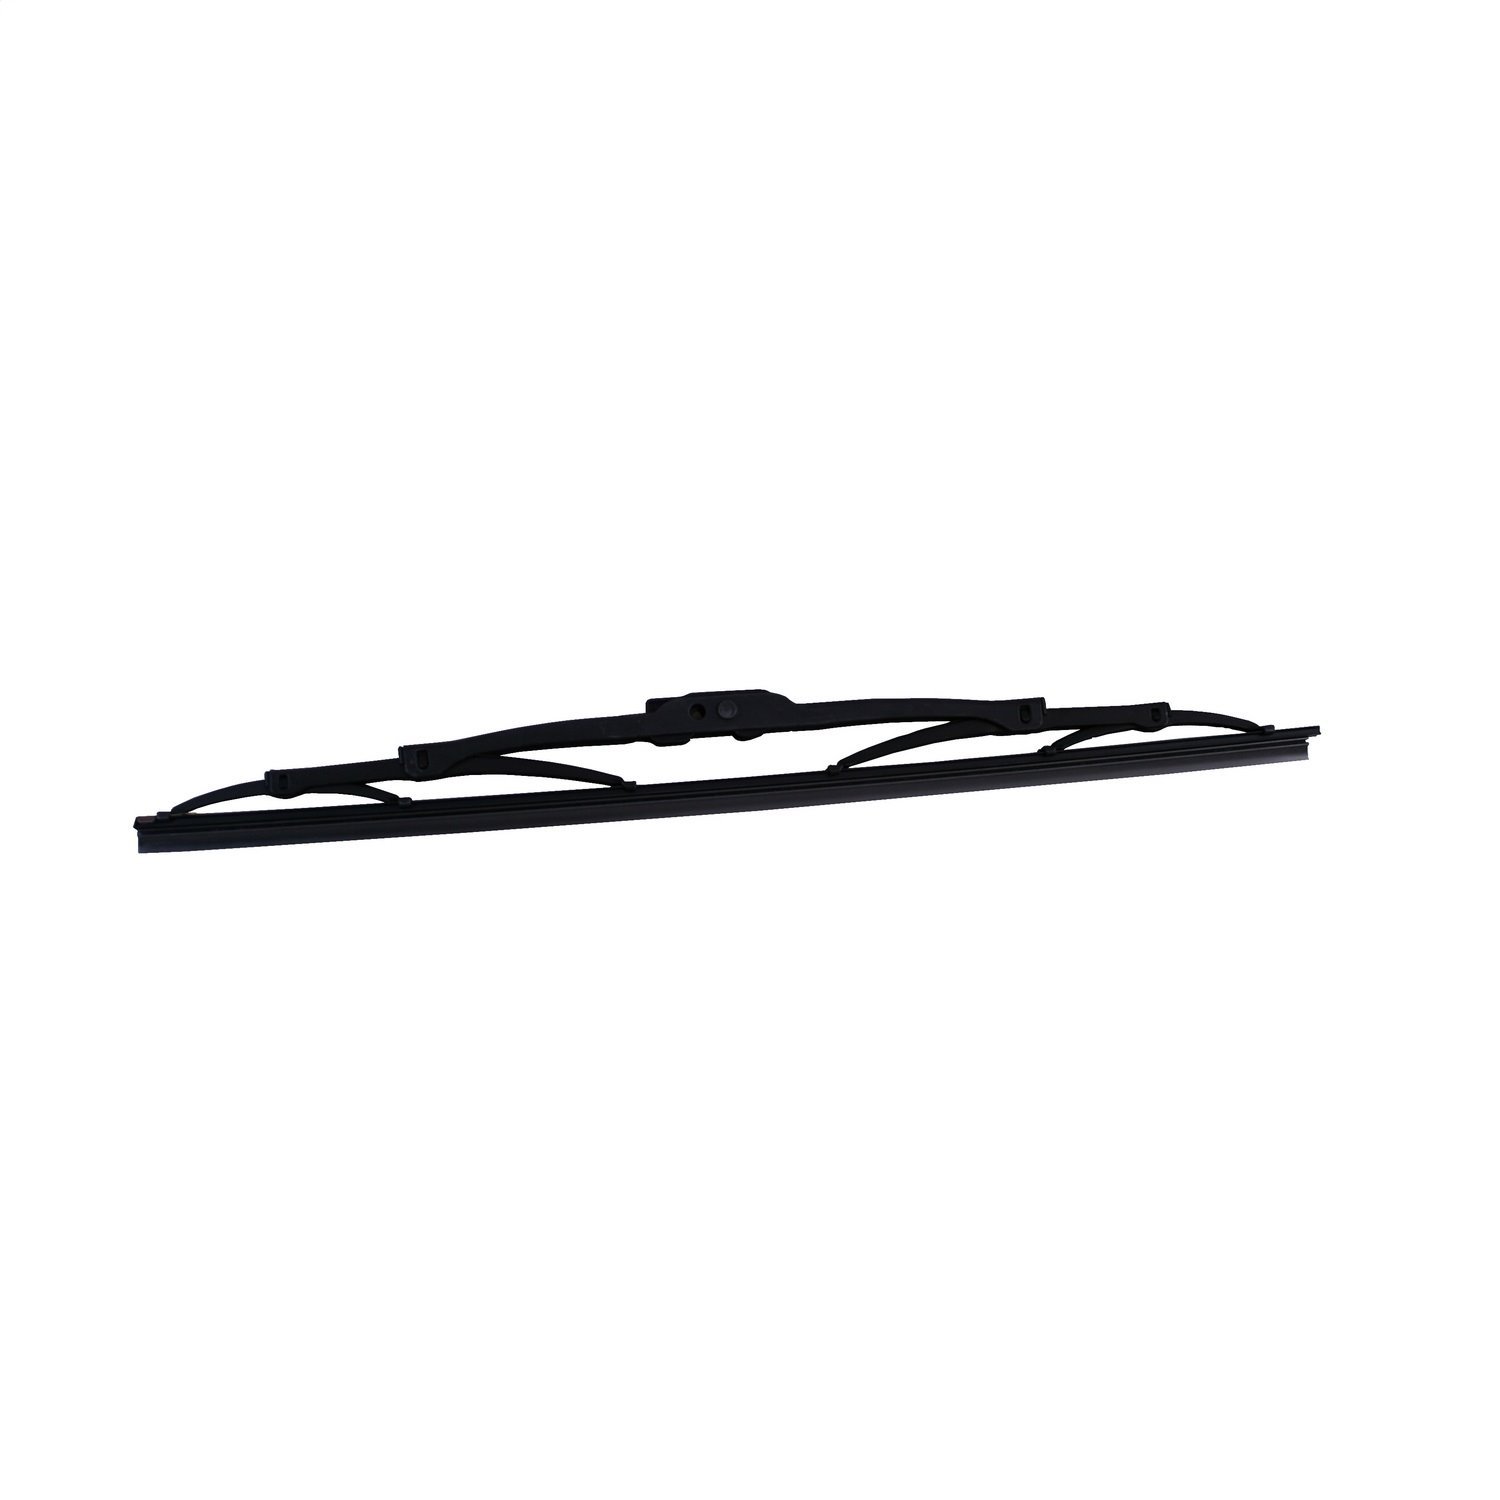 This 15 inch front wiper blade from Omix-ADA fits 07-16 Jeep Wrangler JK .